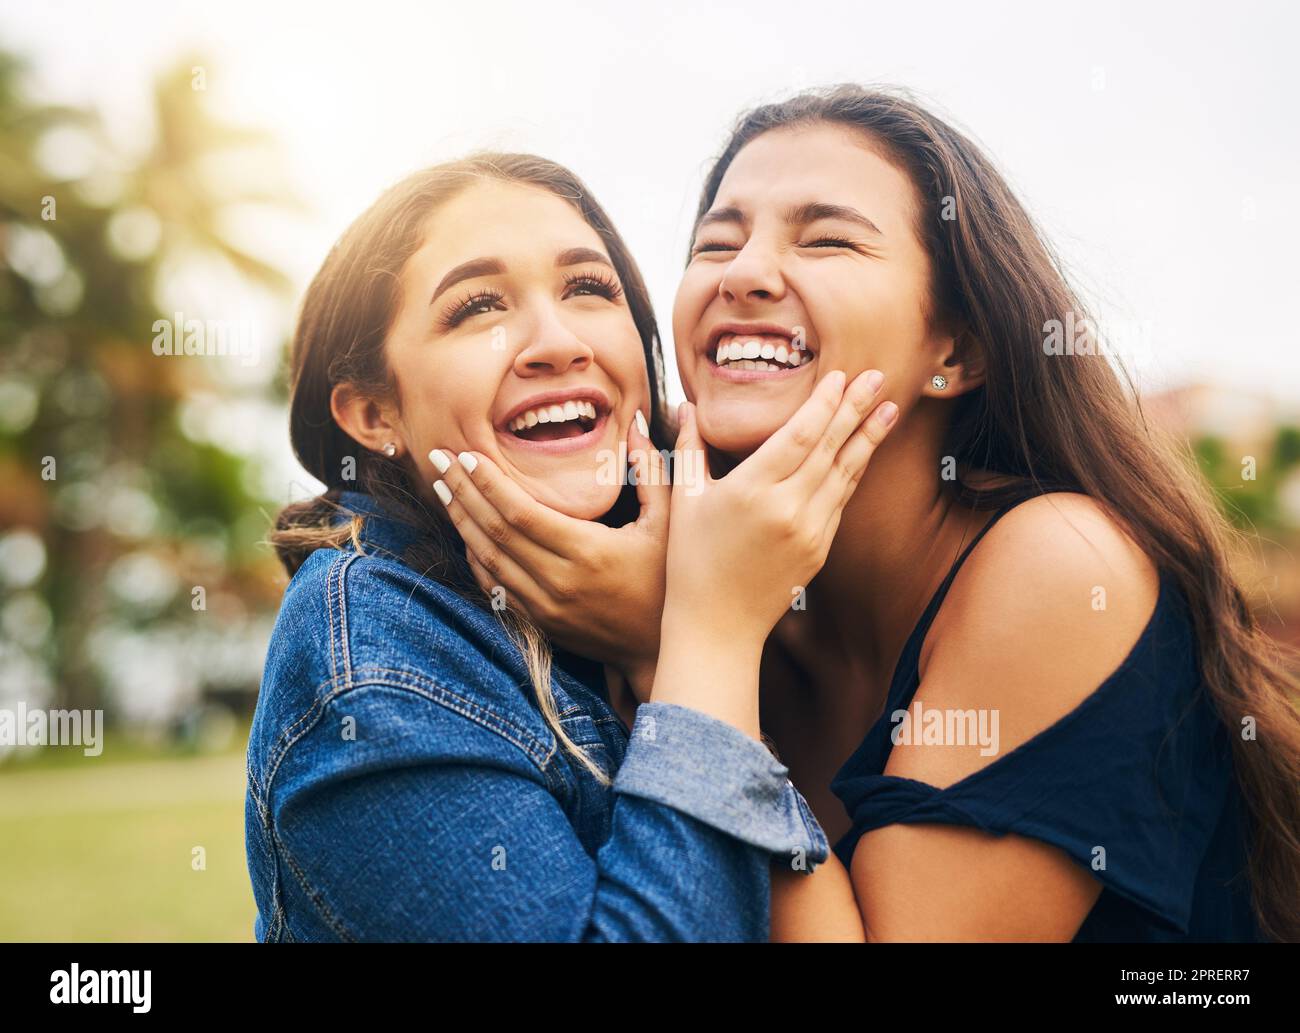 Laughter all around when Im with my best friend. two female best friends hanging out in a public park. Stock Photo